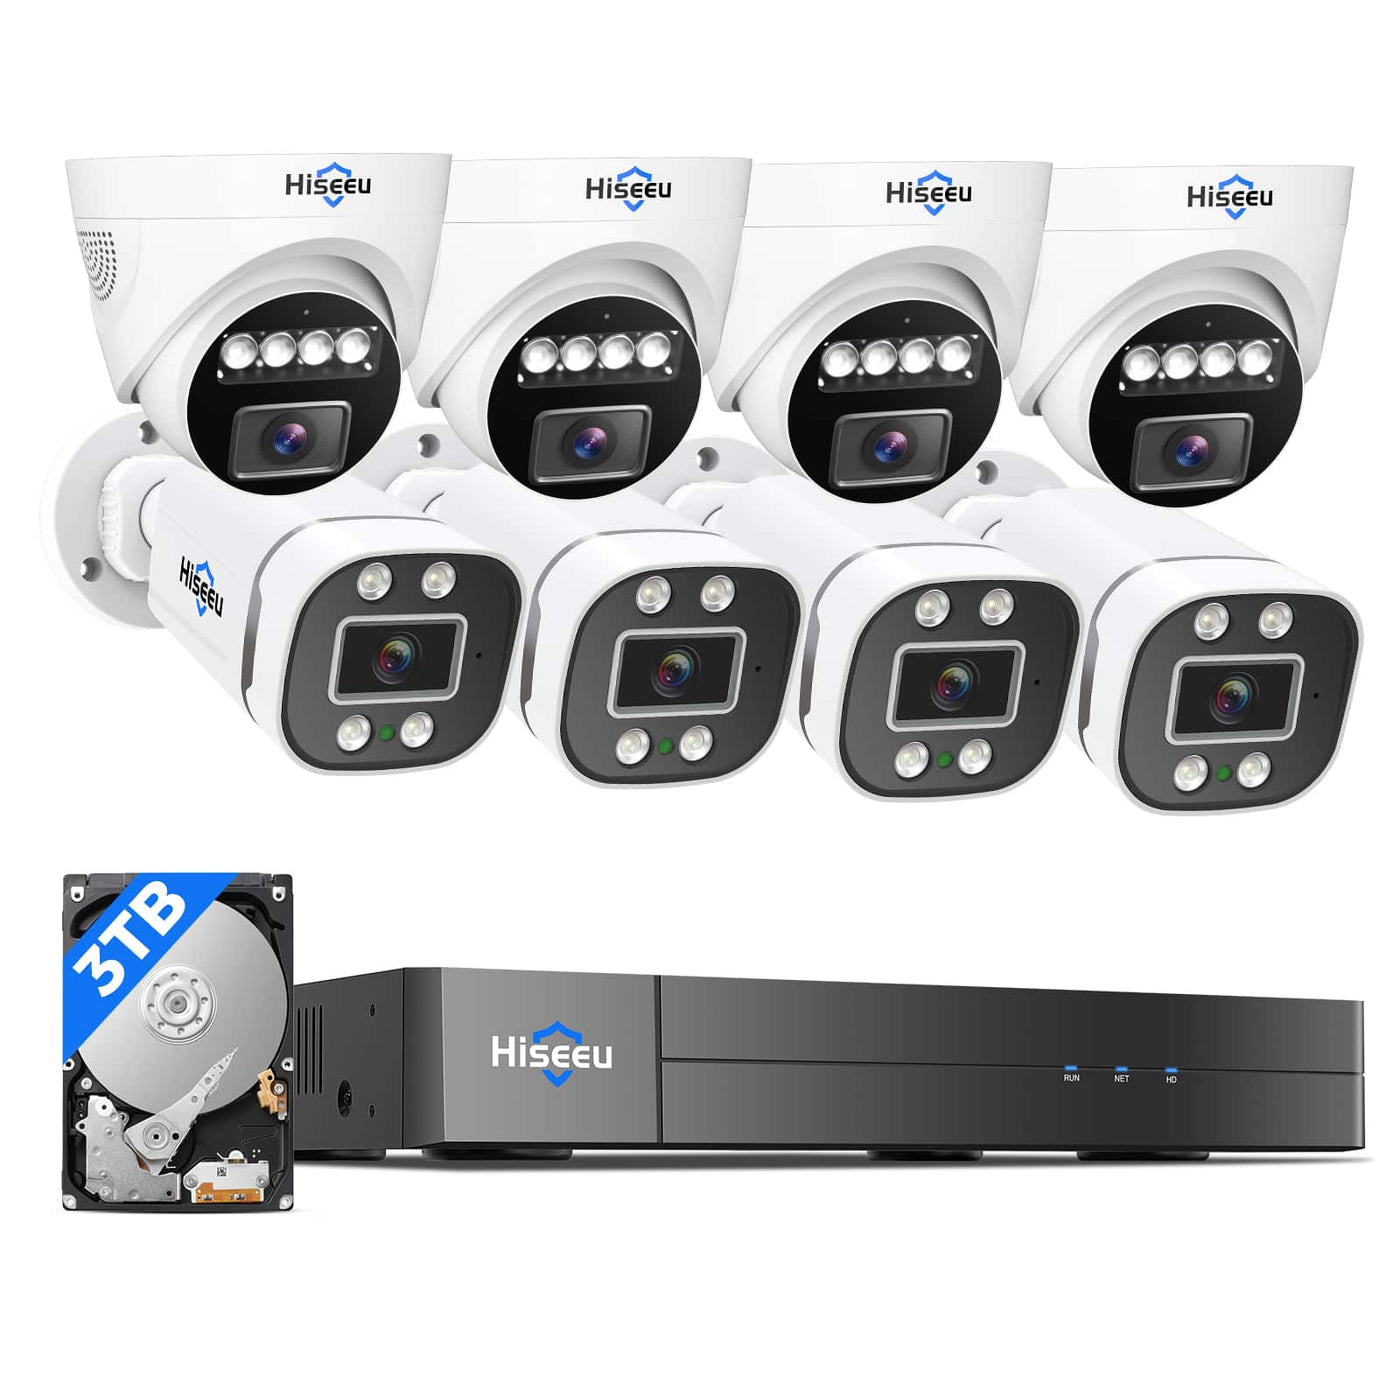 Hiseeu 5MP 16CH Wired Security Camera System H.265+ 16ch 5MP Surveillance DVR 8pcs Outdoor&Indoor Cameras Expand to 16ch with 3TB HDD Person/Vehicle Detection Night Vision 24/7 Record Remote Access